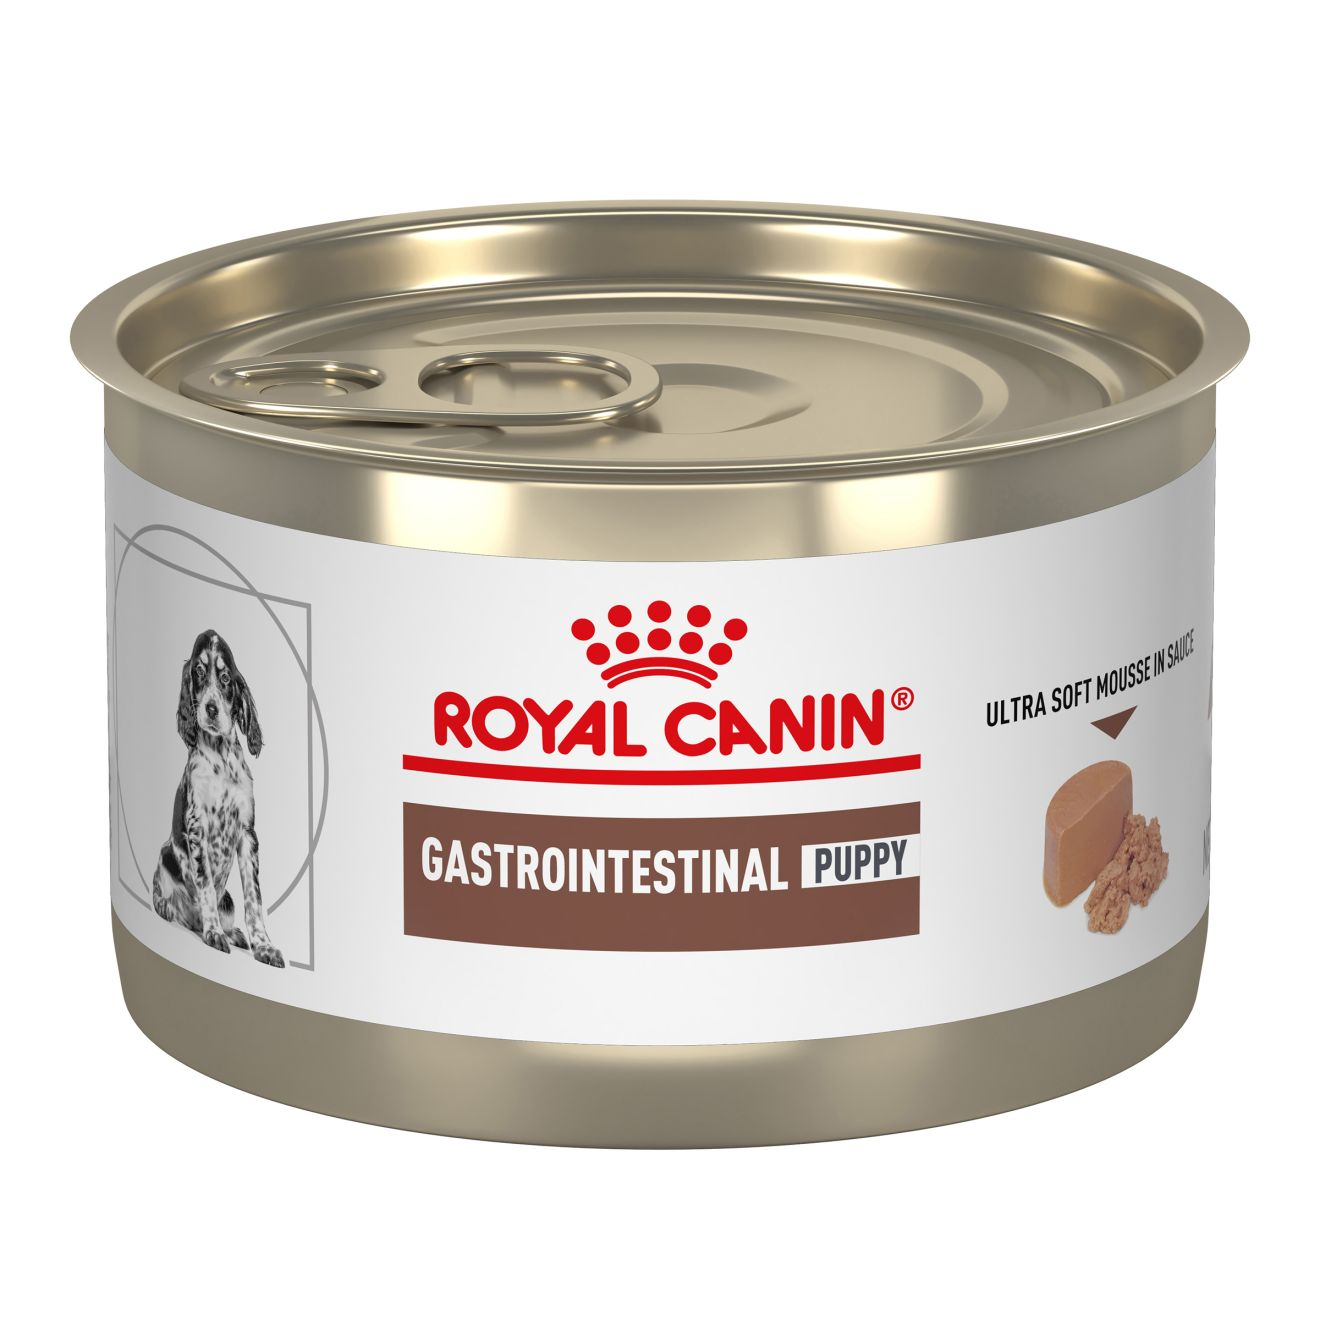 Canine Gastrointestinal Puppy Ultra Soft Mousse In Sauce 